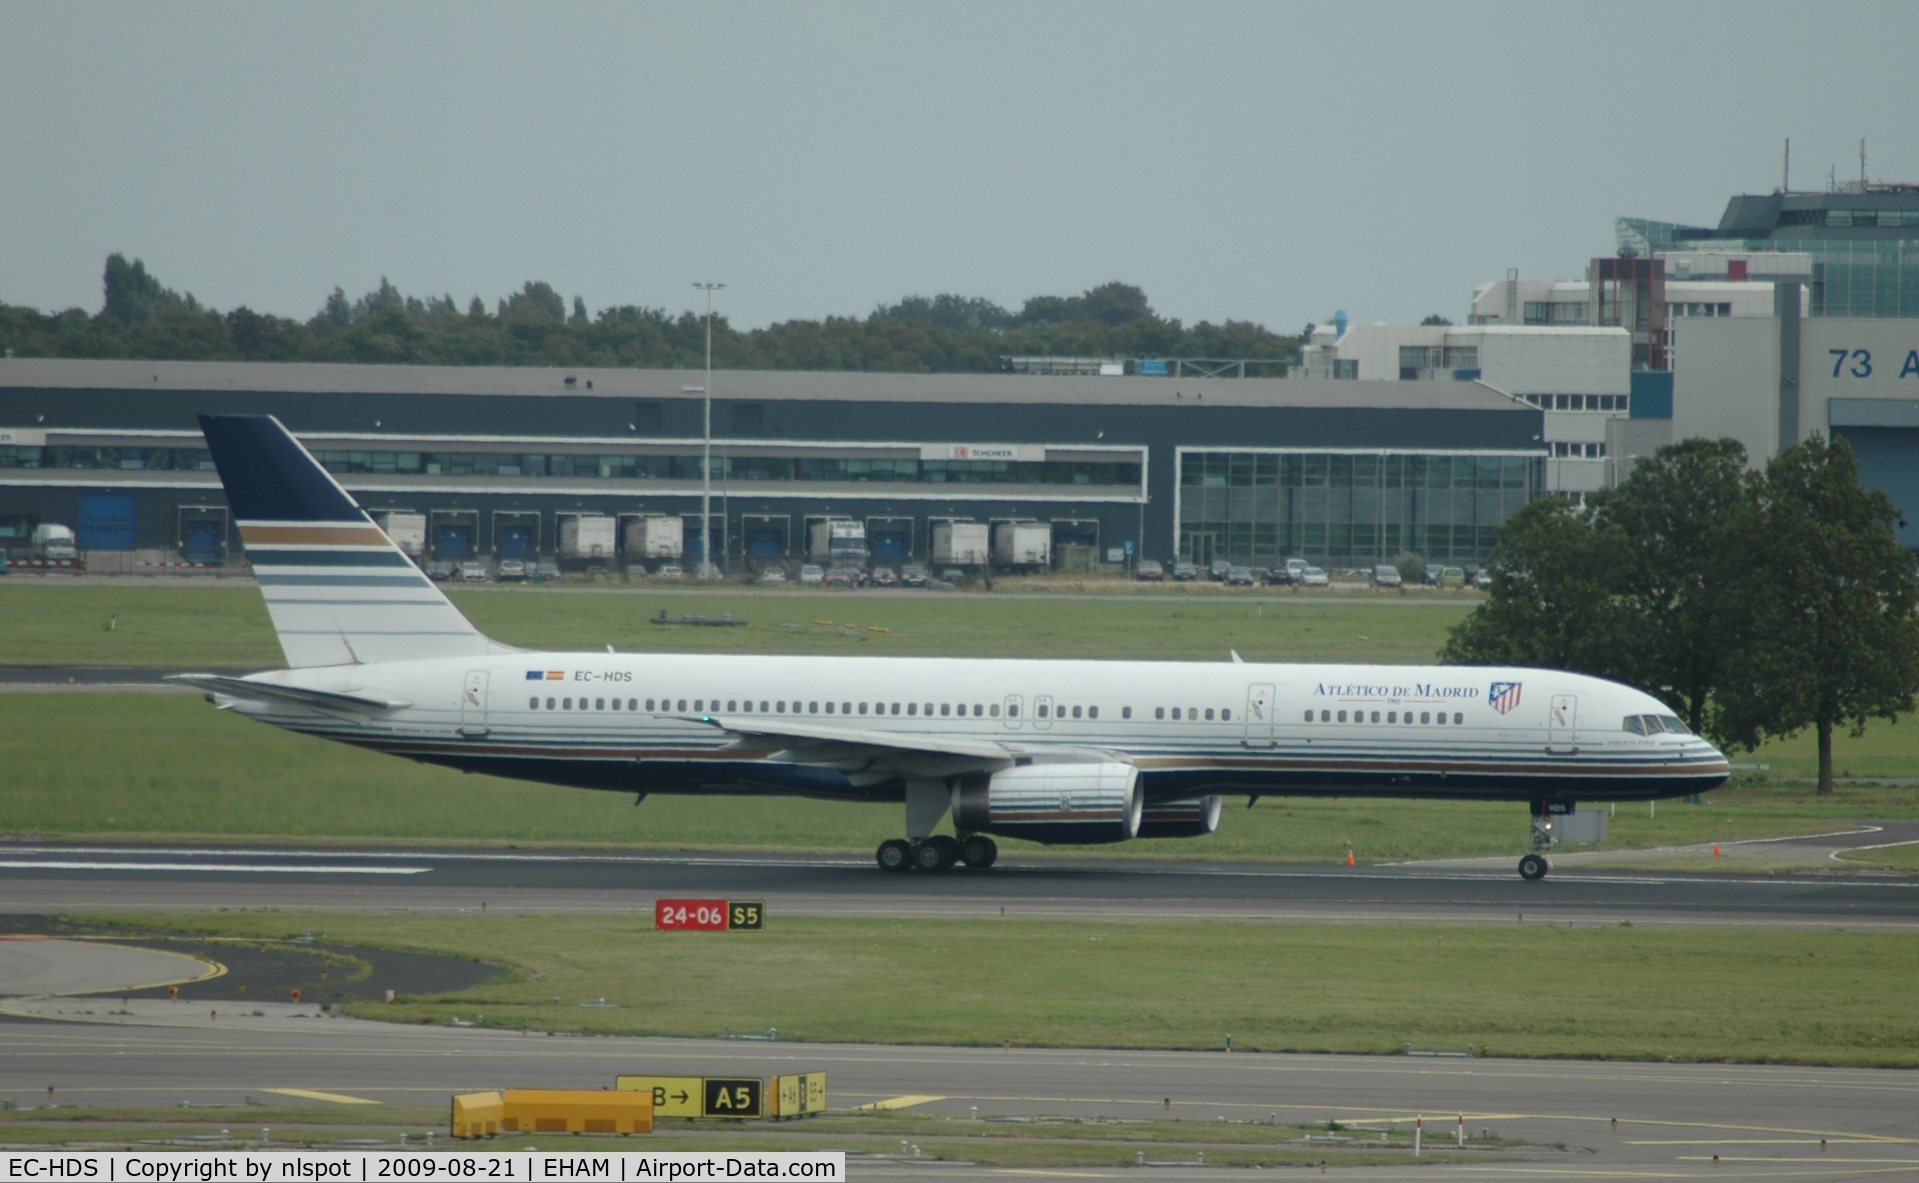 EC-HDS, 1999 Boeing 757-256 C/N 26252, now with Athletico Madrid titles.